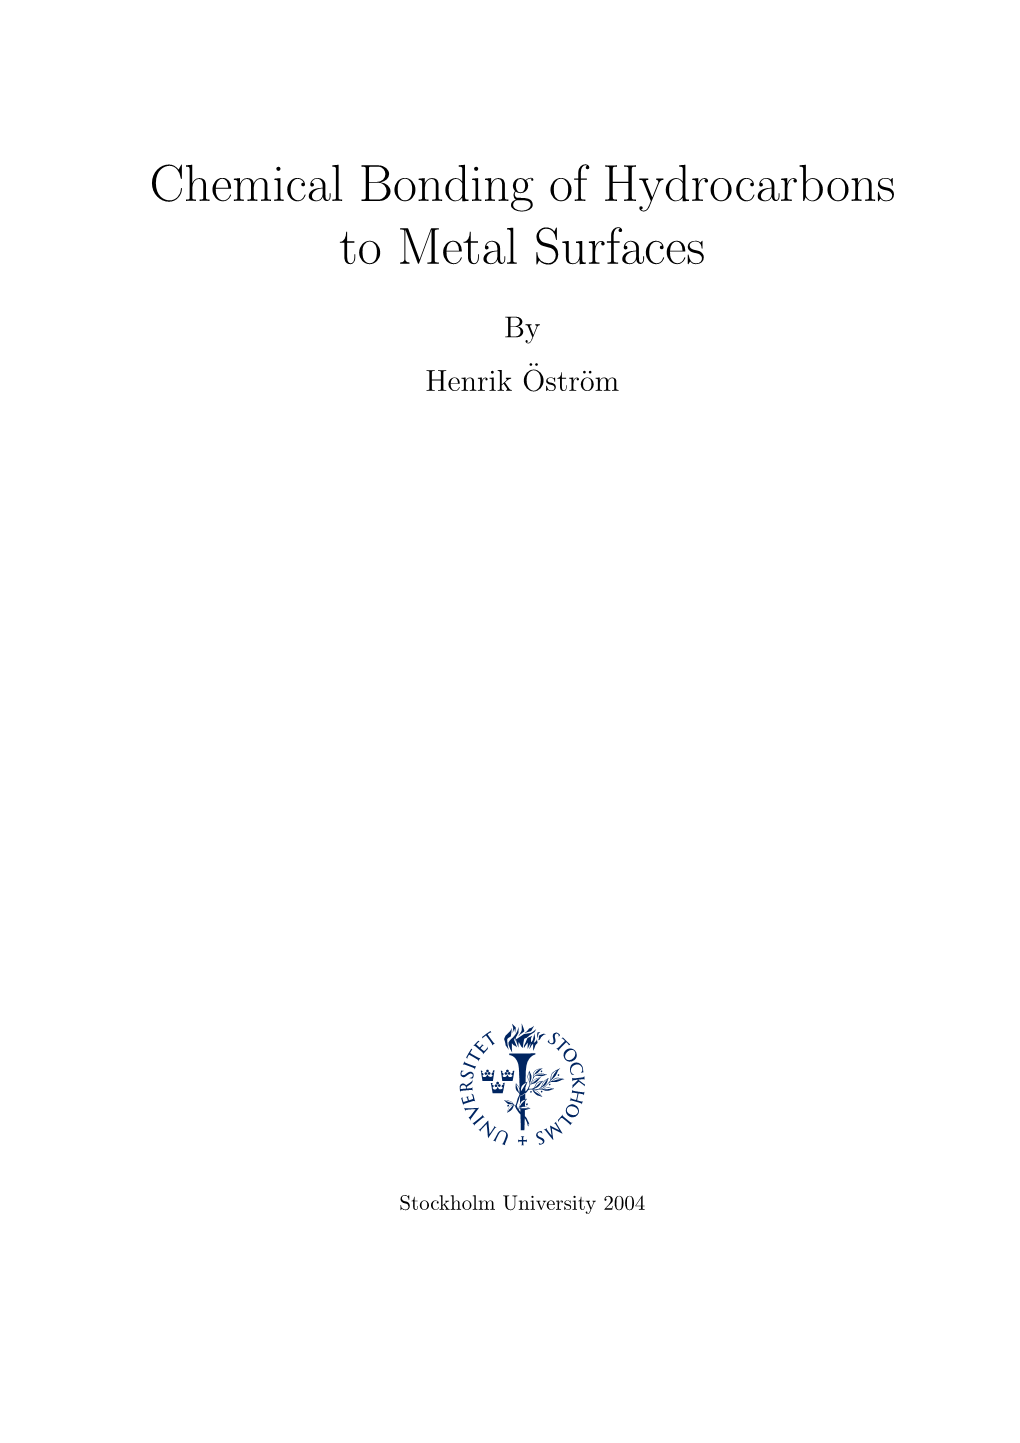 Chemical Bonding of Hydrocarbons to Metal Surfaces